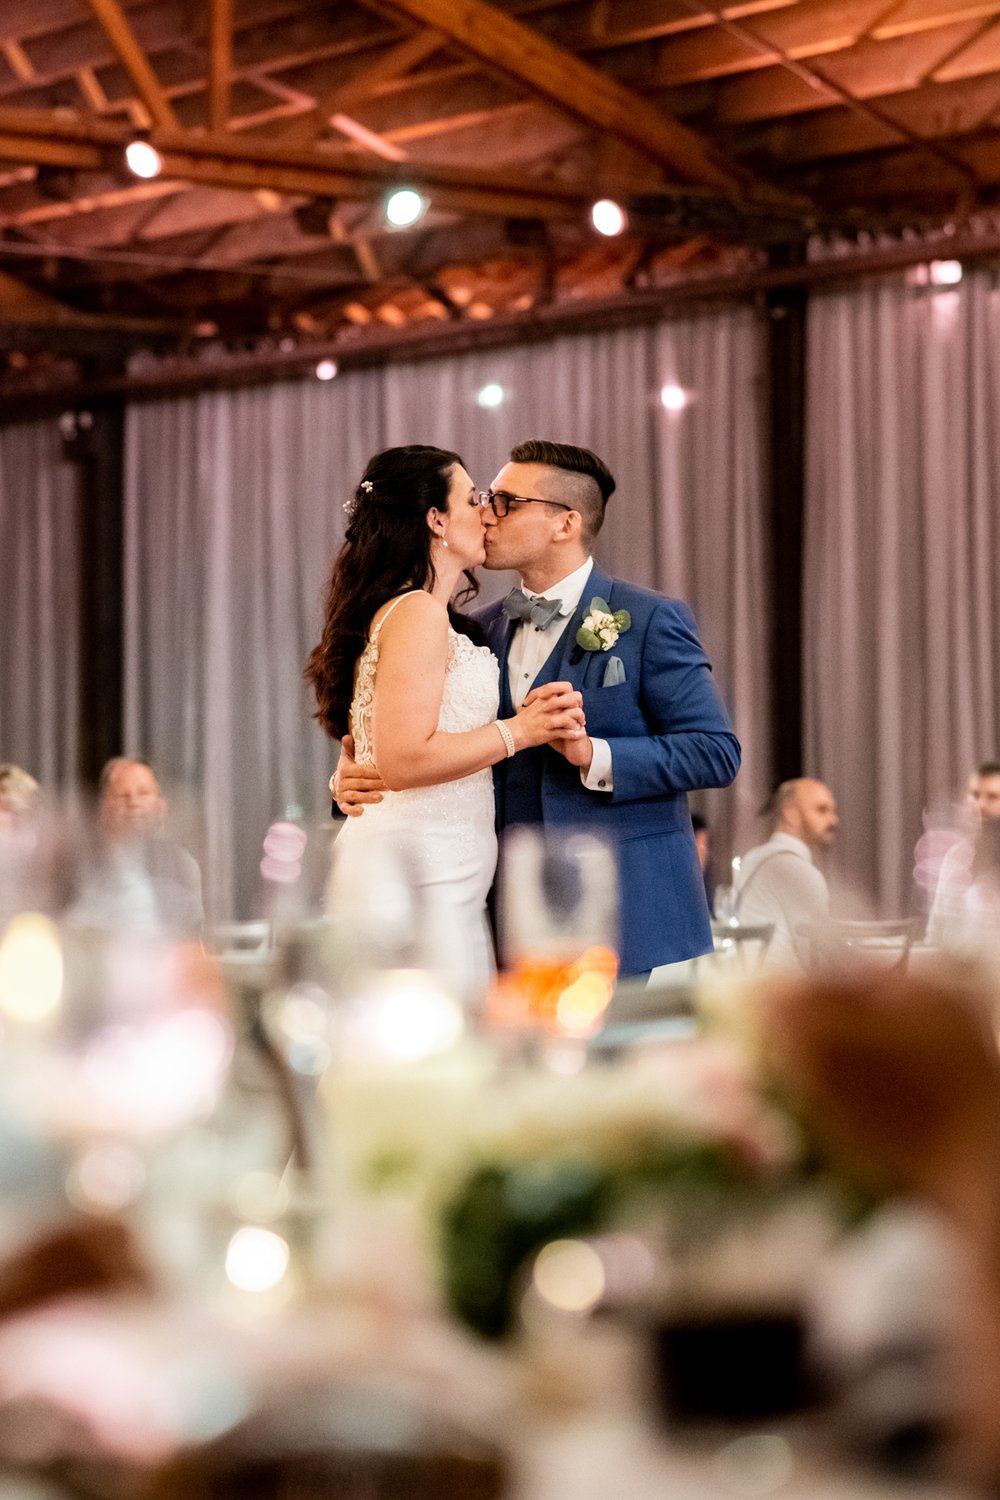 Alex Maldonado Photography | Chicago Wedding Photographer | bride and groom first dance at rockwell on the river.jpg